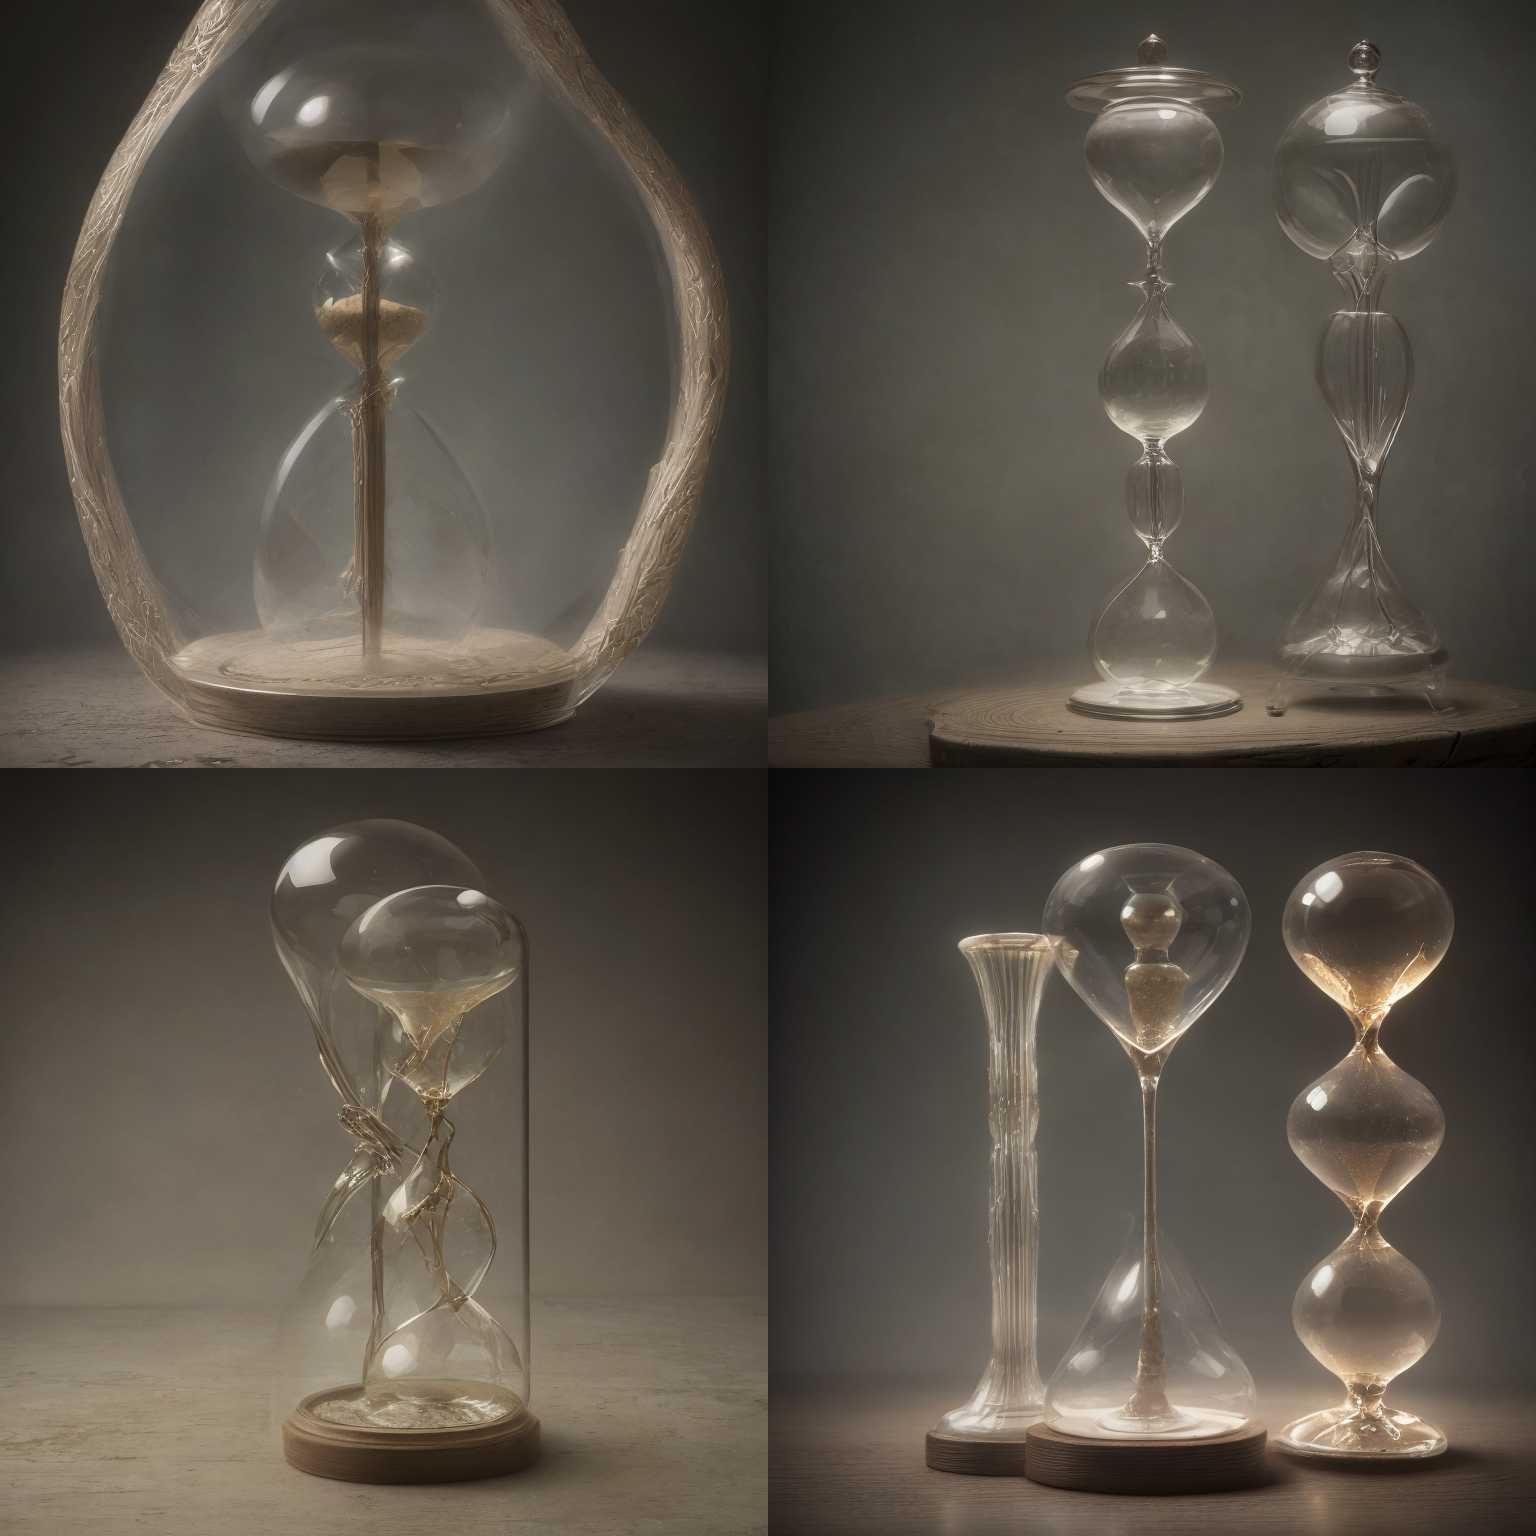 An hourglass just starting to count